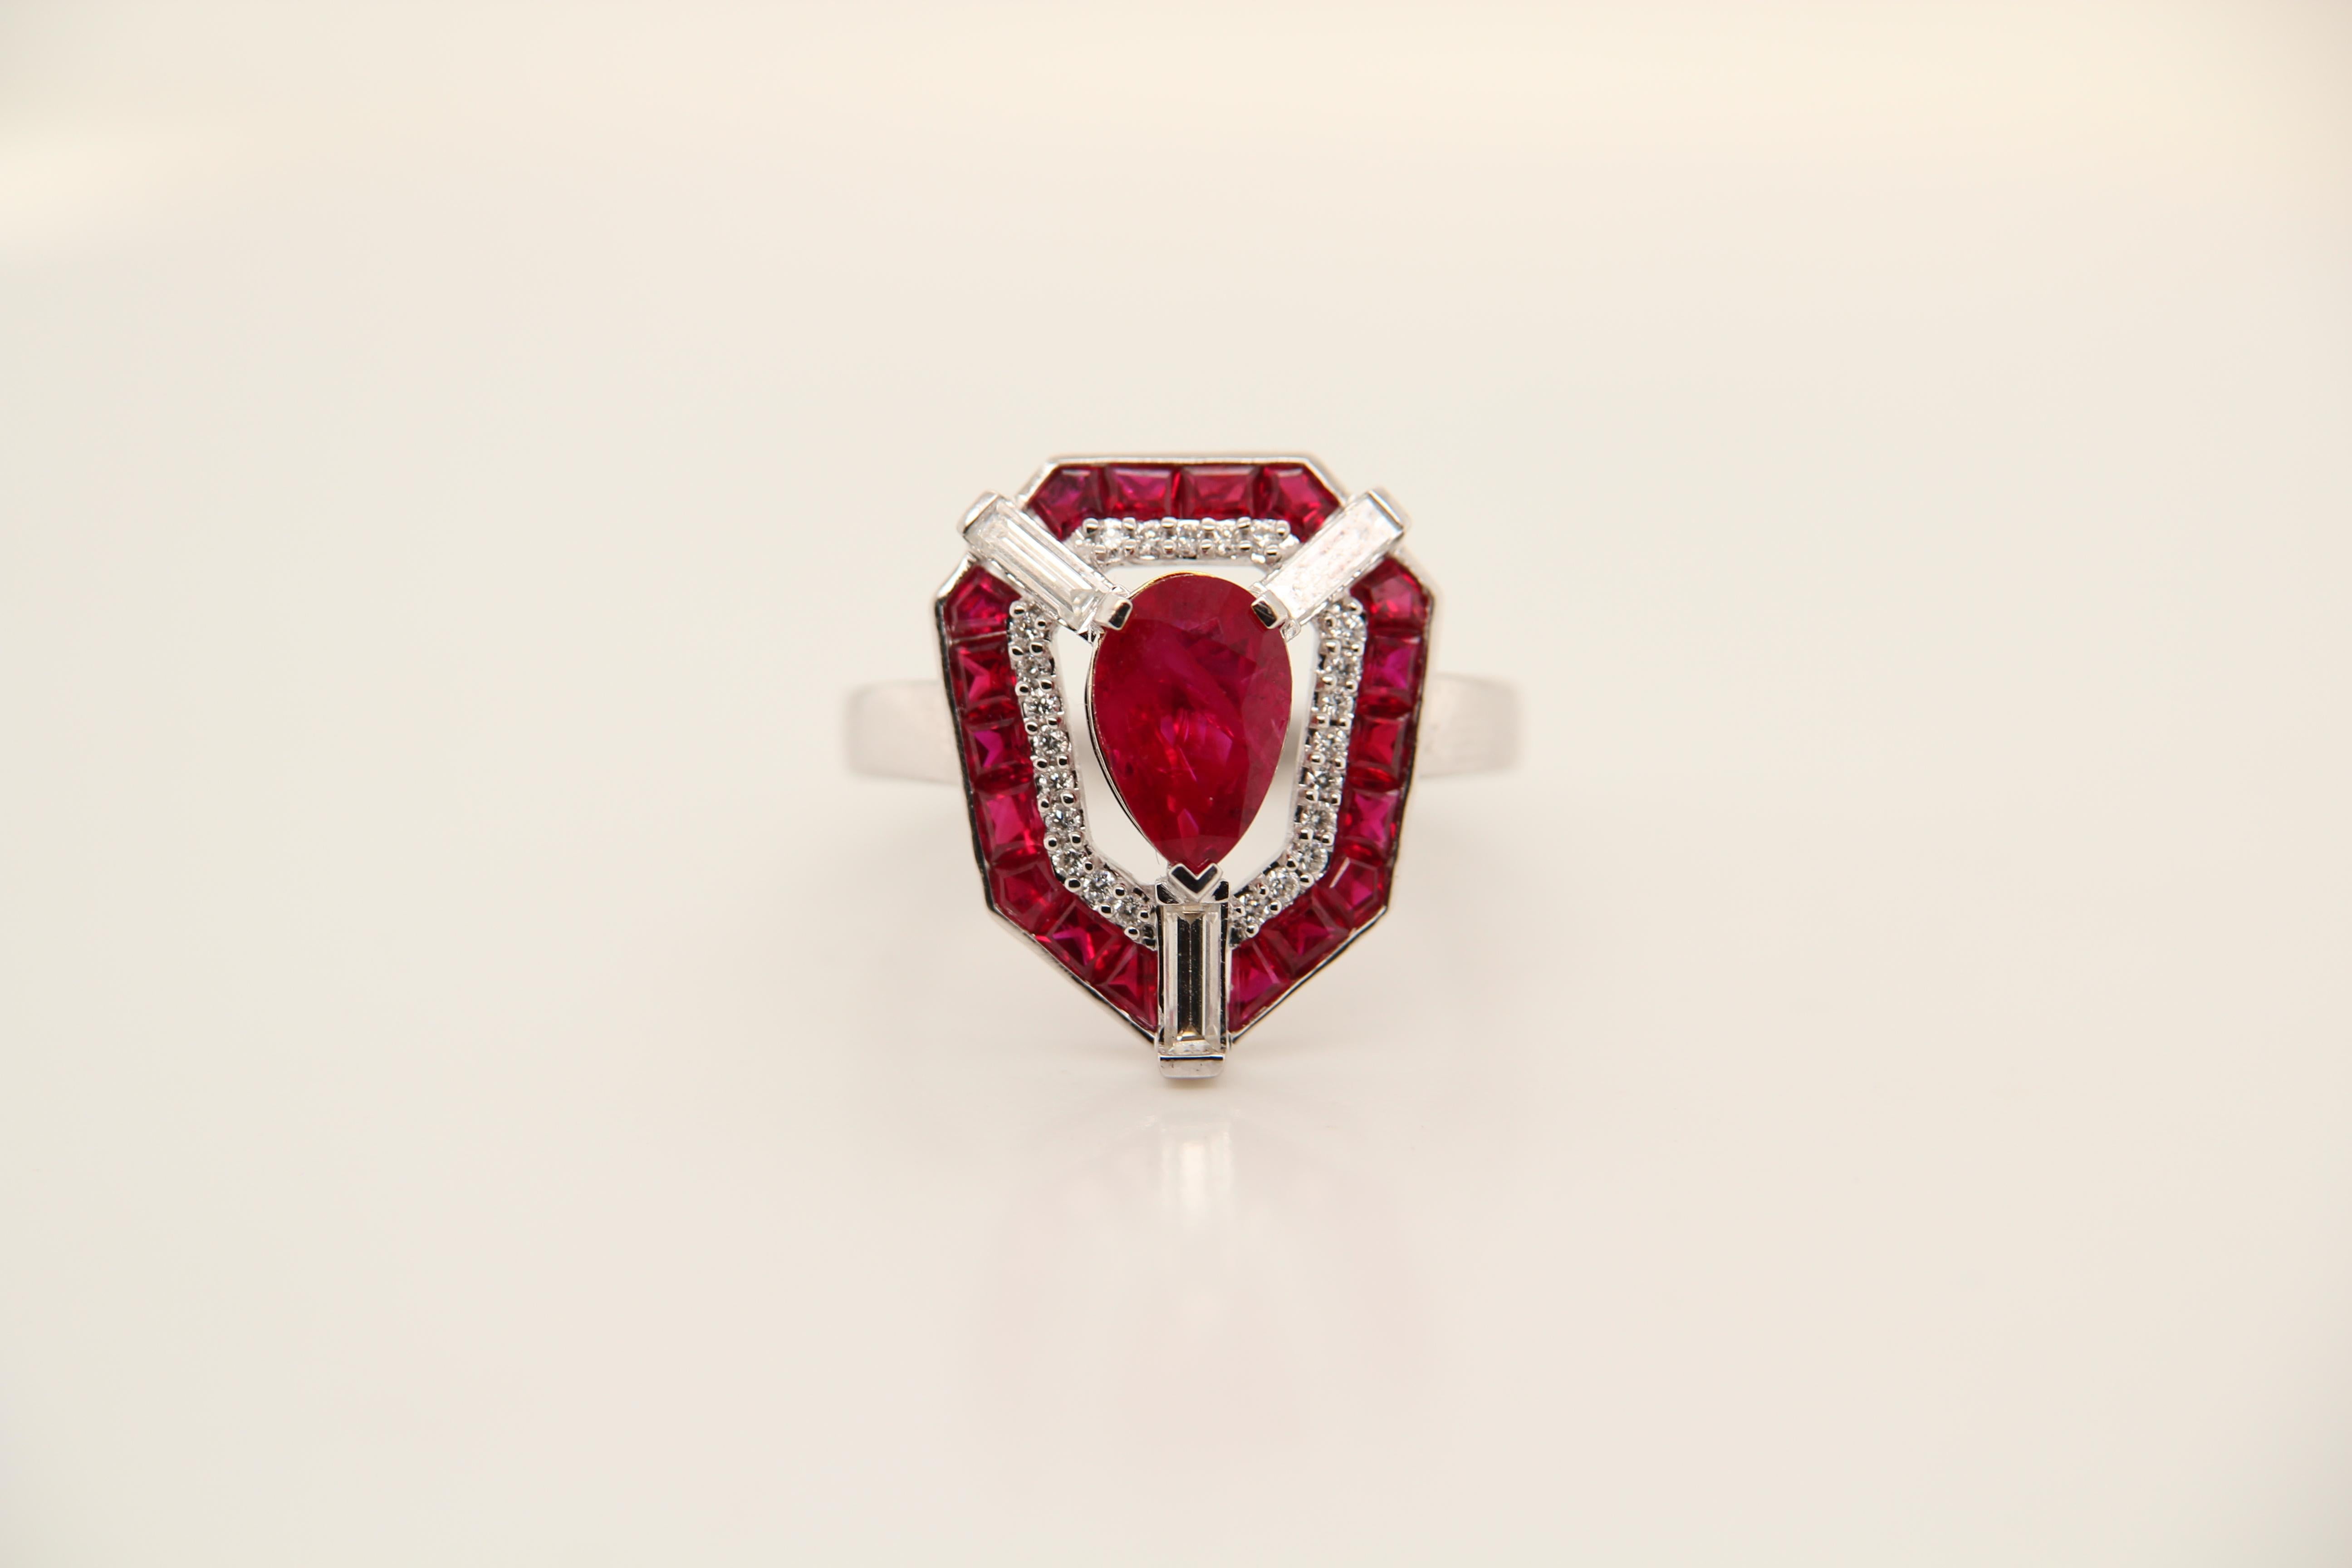 A Ruby and diamond ring. The ring's center stone is 1.40 carat pigeon blood Burmese ruby certified by GRS. The center stone is surrounded by 1.14 carat princess shaped rubies and 0.48 carat bugget. The ring can be resized.